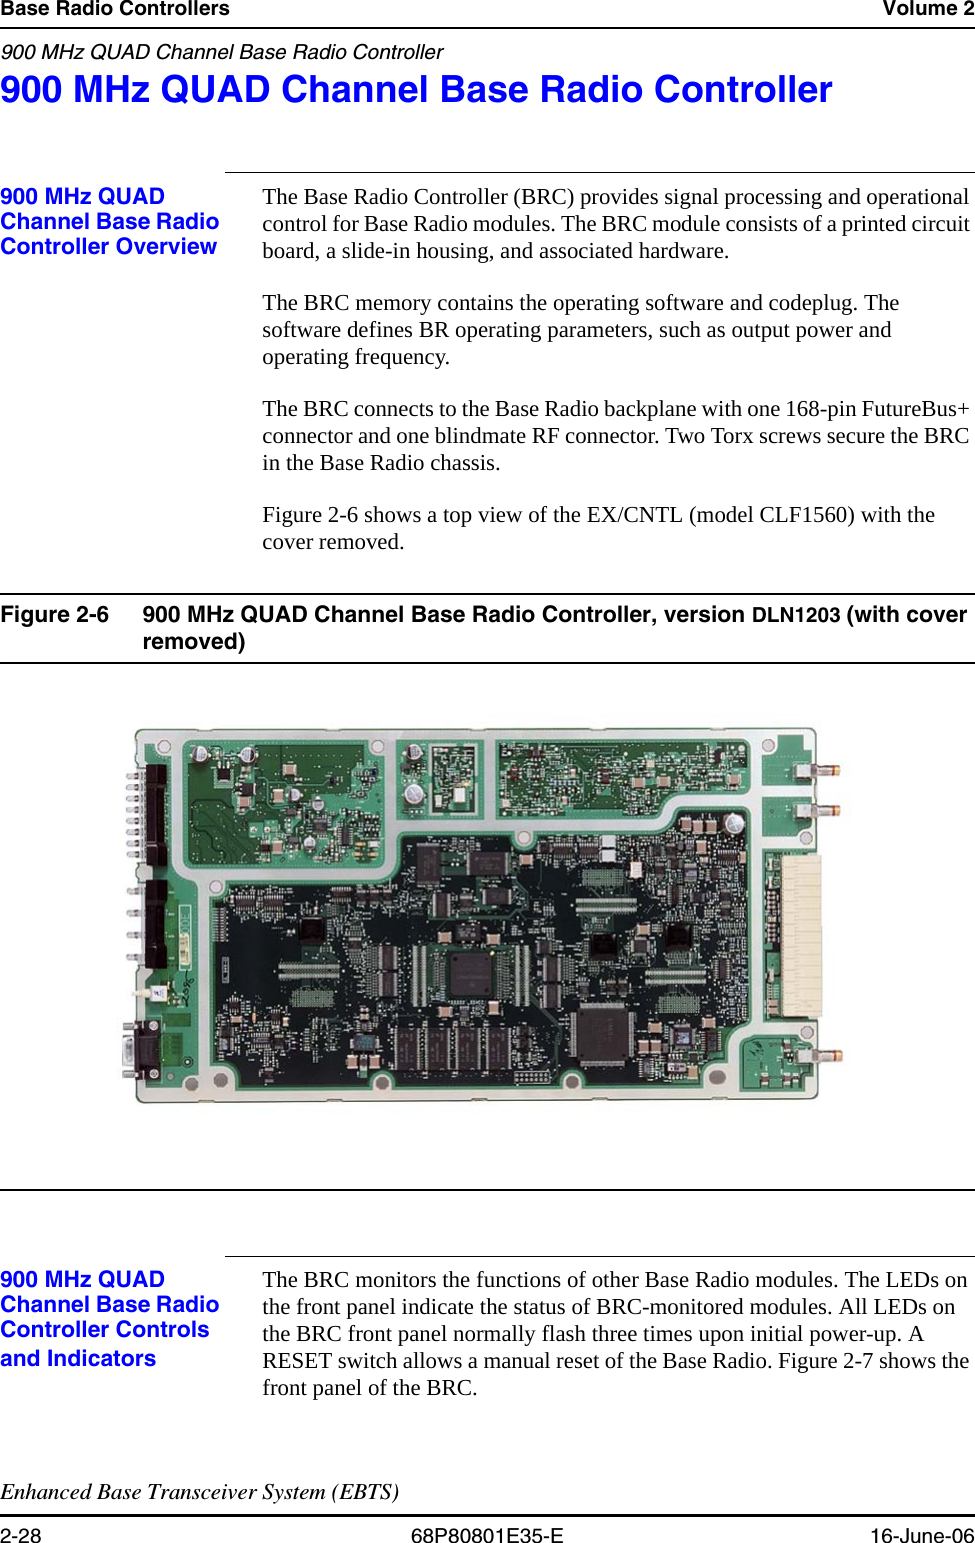 Base Radio Controllers Volume 2900 MHz QUAD Channel Base Radio ControllerEnhanced Base Transceiver System (EBTS)2-28 68P80801E35-E 16-June-06900 MHz QUAD Channel Base Radio Controller 2900 MHz QUAD Channel Base Radio Controller OverviewThe Base Radio Controller (BRC) provides signal processing and operational control for Base Radio modules. The BRC module consists of a printed circuit board, a slide-in housing, and associated hardware.The BRC memory contains the operating software and codeplug. The software defines BR operating parameters, such as output power and operating frequency. The BRC connects to the Base Radio backplane with one 168-pin FutureBus+ connector and one blindmate RF connector. Two Torx screws secure the BRC in the Base Radio chassis. Figure 2-6 shows a top view of the EX/CNTL (model CLF1560) with the cover removed.Figure 2-6 900 MHz QUAD Channel Base Radio Controller, version DLN1203 (with cover removed) 900 MHz QUAD Channel Base Radio Controller Controls and IndicatorsThe BRC monitors the functions of other Base Radio modules. The LEDs on the front panel indicate the status of BRC-monitored modules. All LEDs on the BRC front panel normally flash three times upon initial power-up. A RESET switch allows a manual reset of the Base Radio. Figure 2-7 shows the front panel of the BRC.